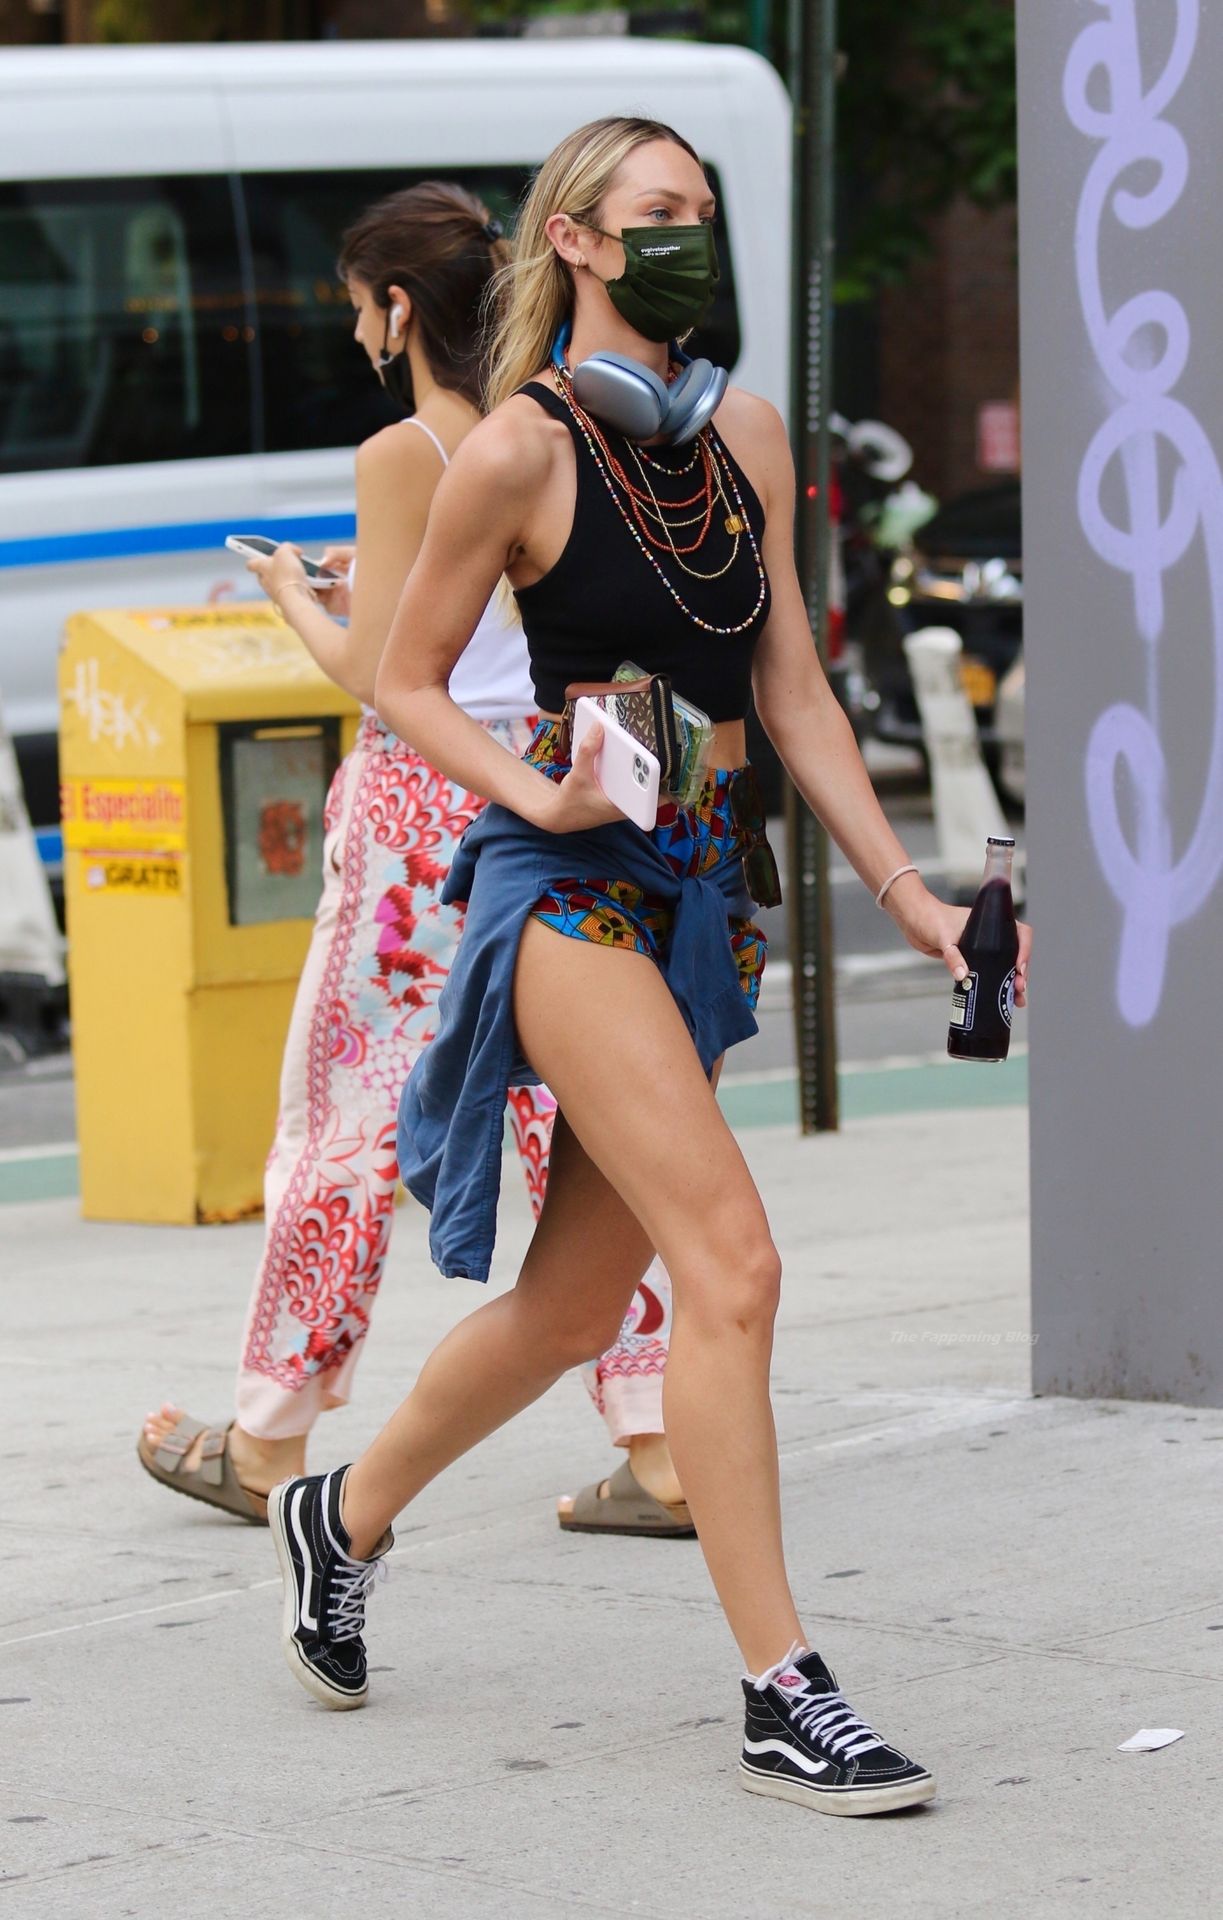 Candice Swanepoel Braves The Heatwave In Short Shorts While Giving Us A